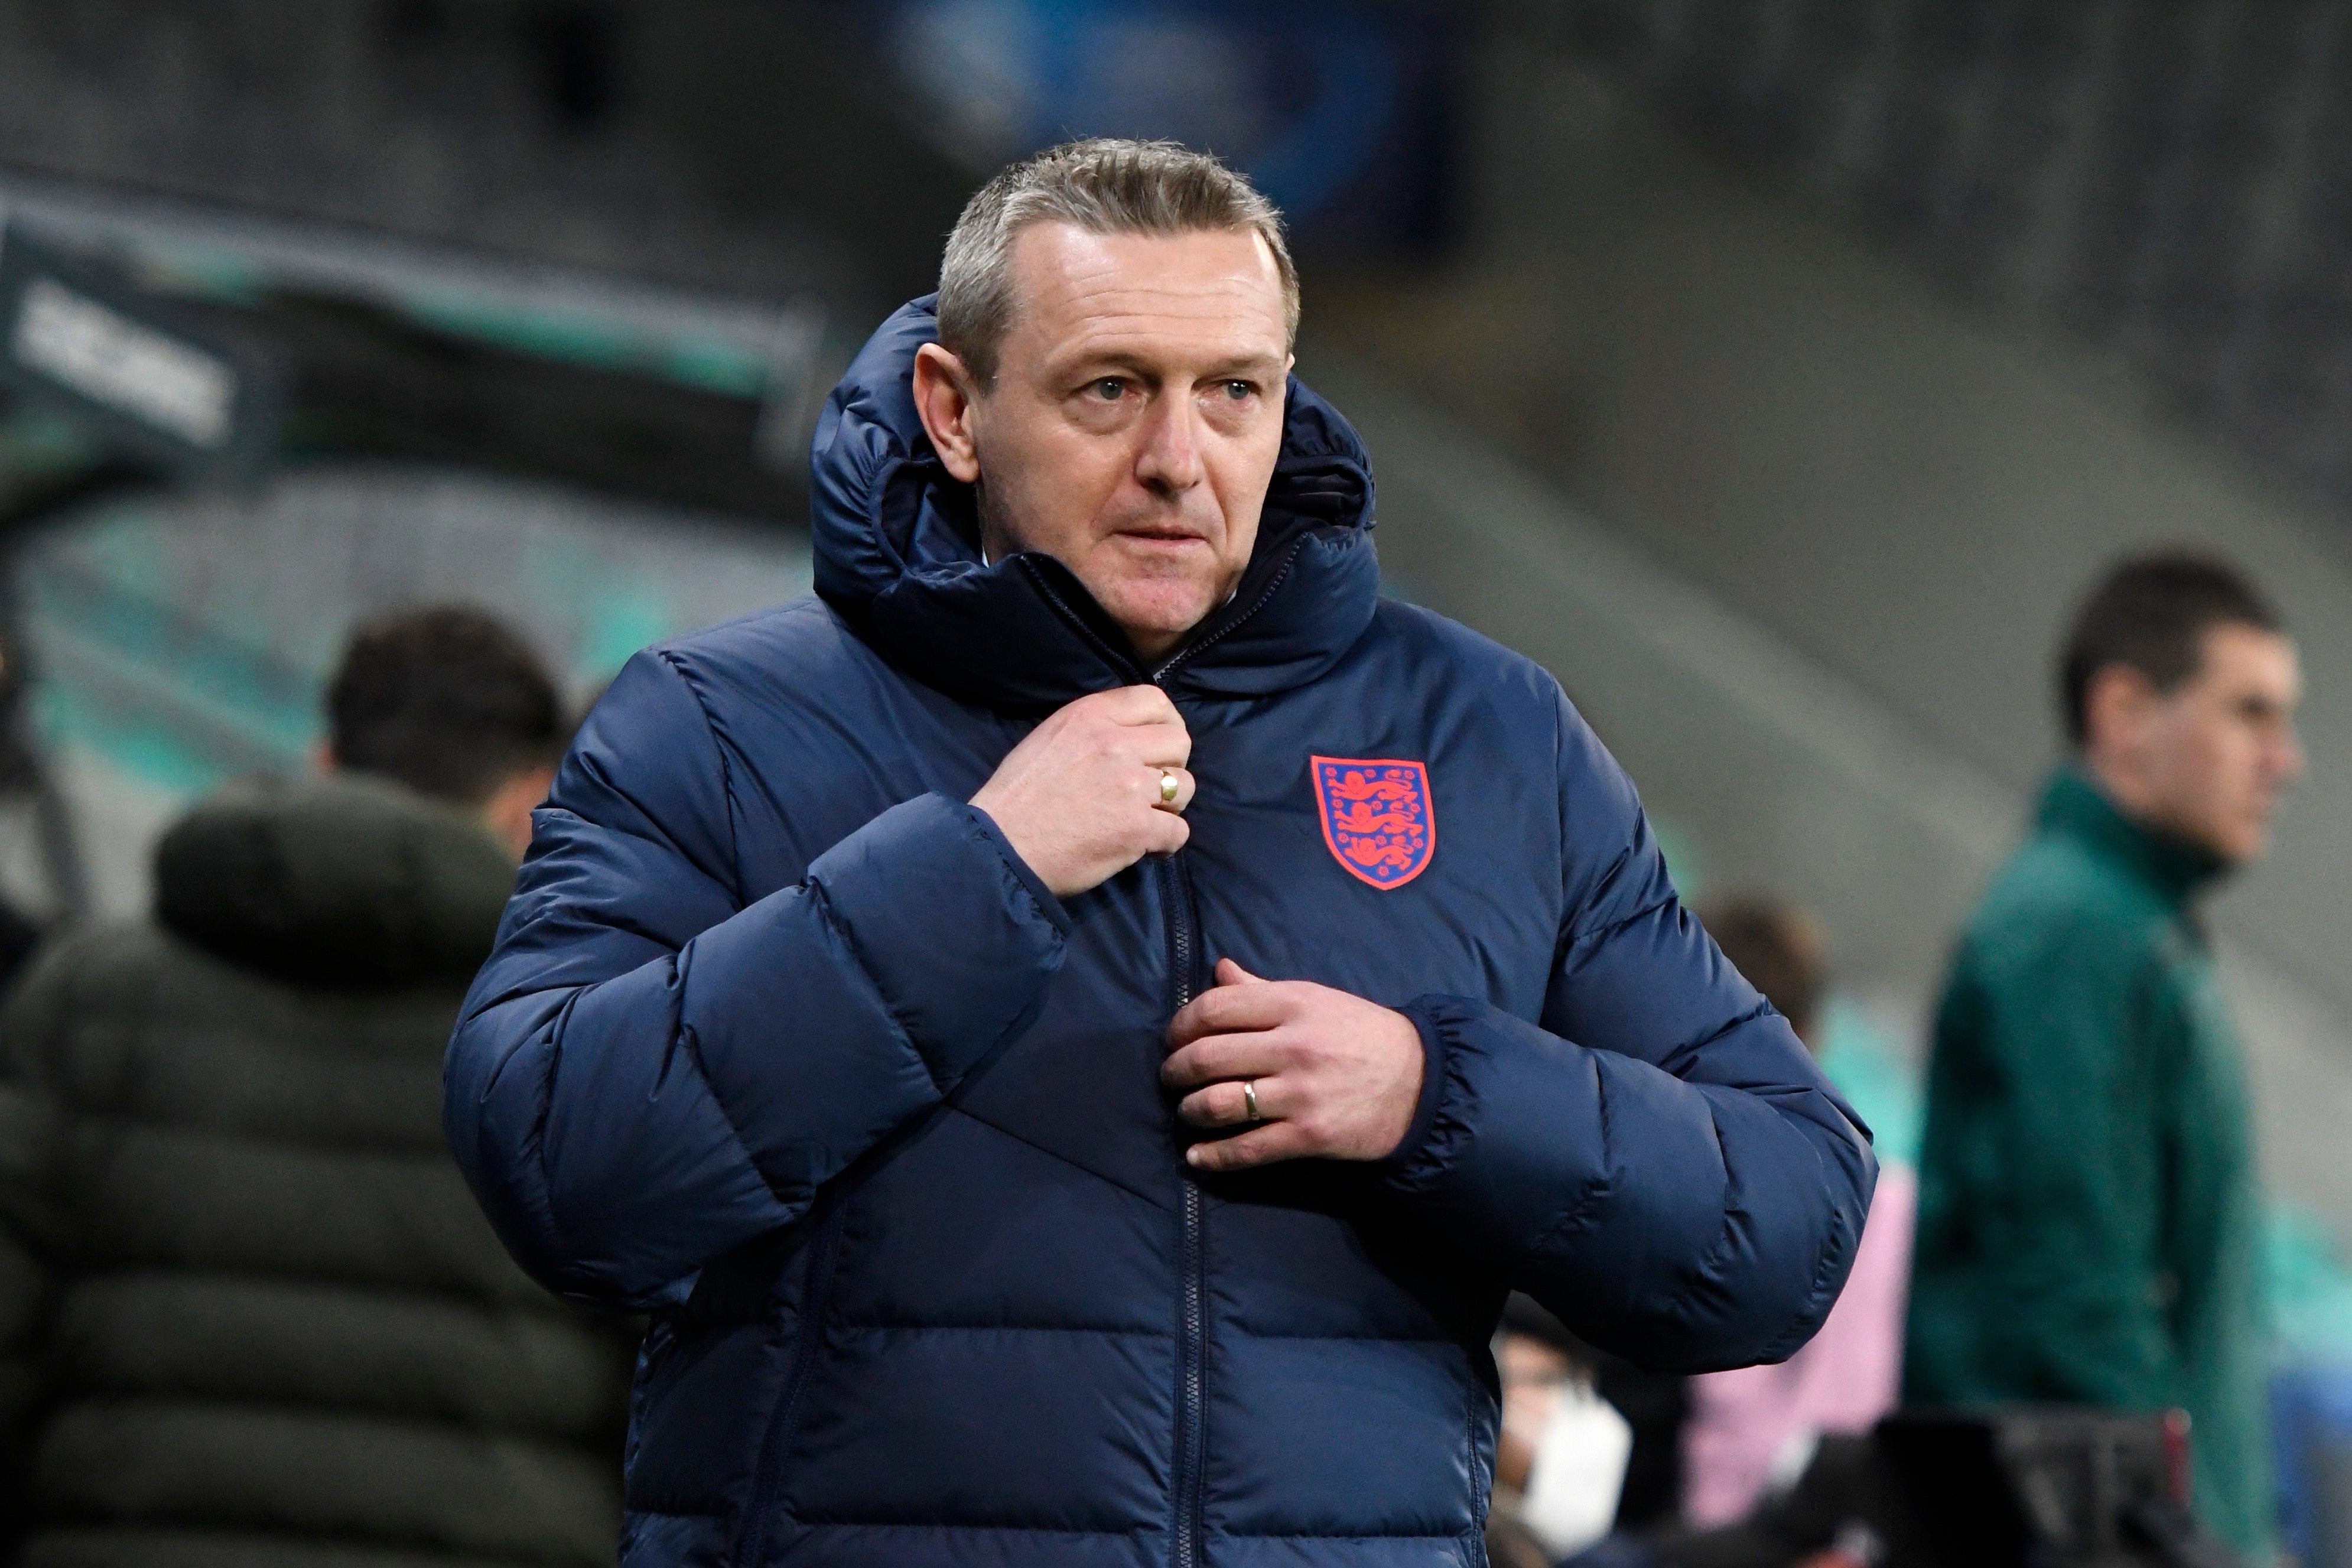 England Under-21s manager Aidy Boothroyd